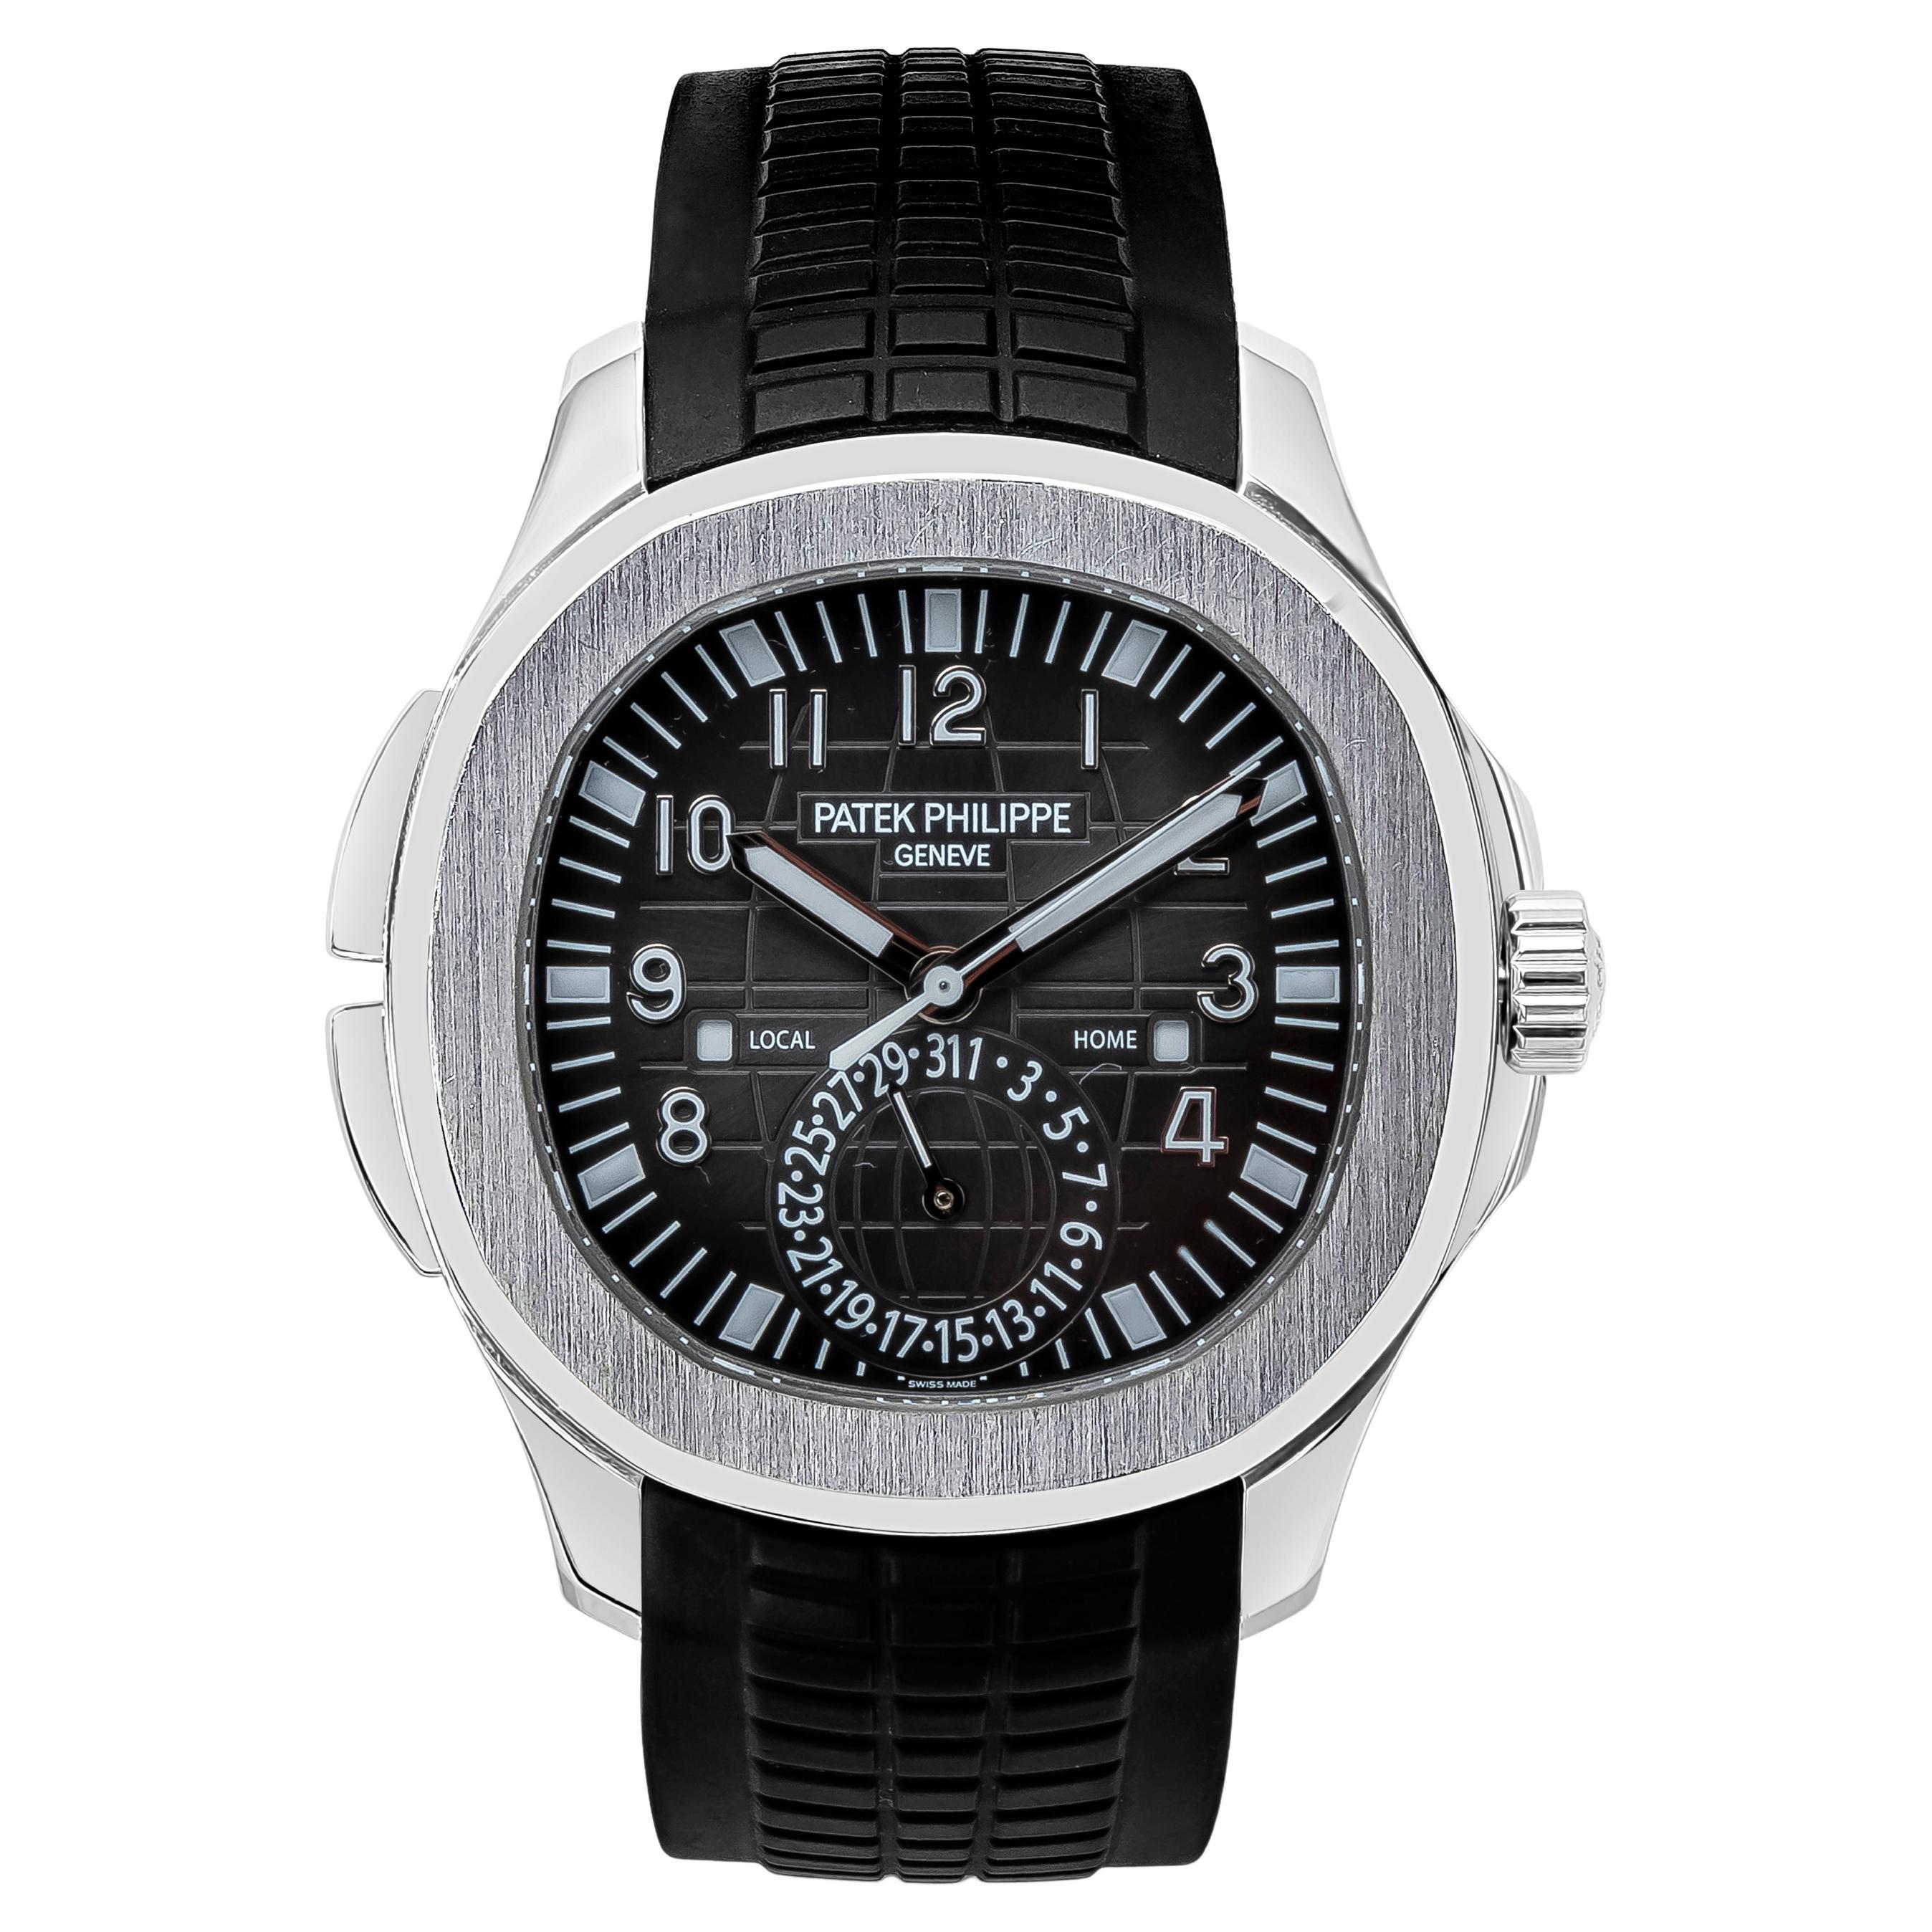 Patek Philippe Aquanaut Travel Time Stainless Steel Wristwatch Ref. 5164A-001 For Sale